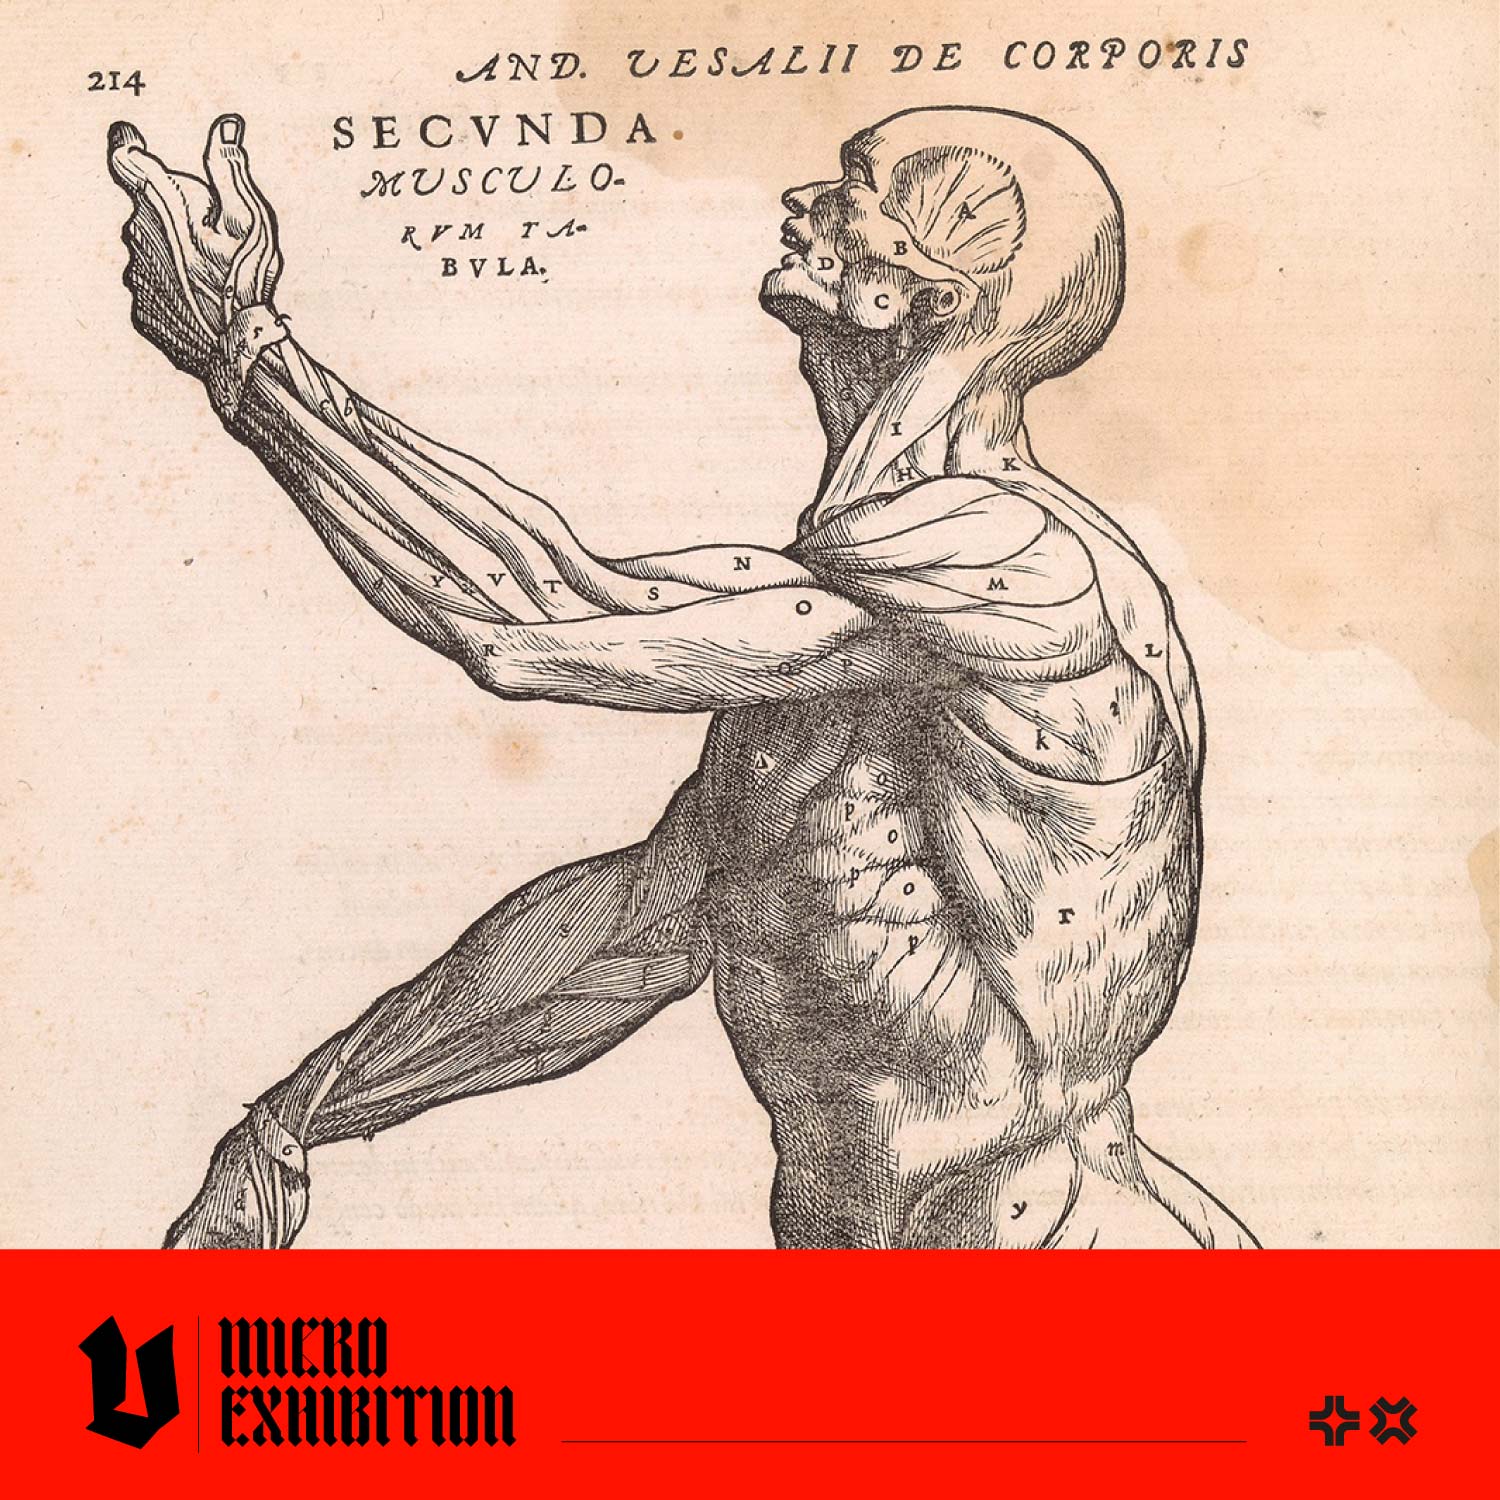 The Evolution of Anatomical Illustrations: From Vesalius to Gray's Anatomy